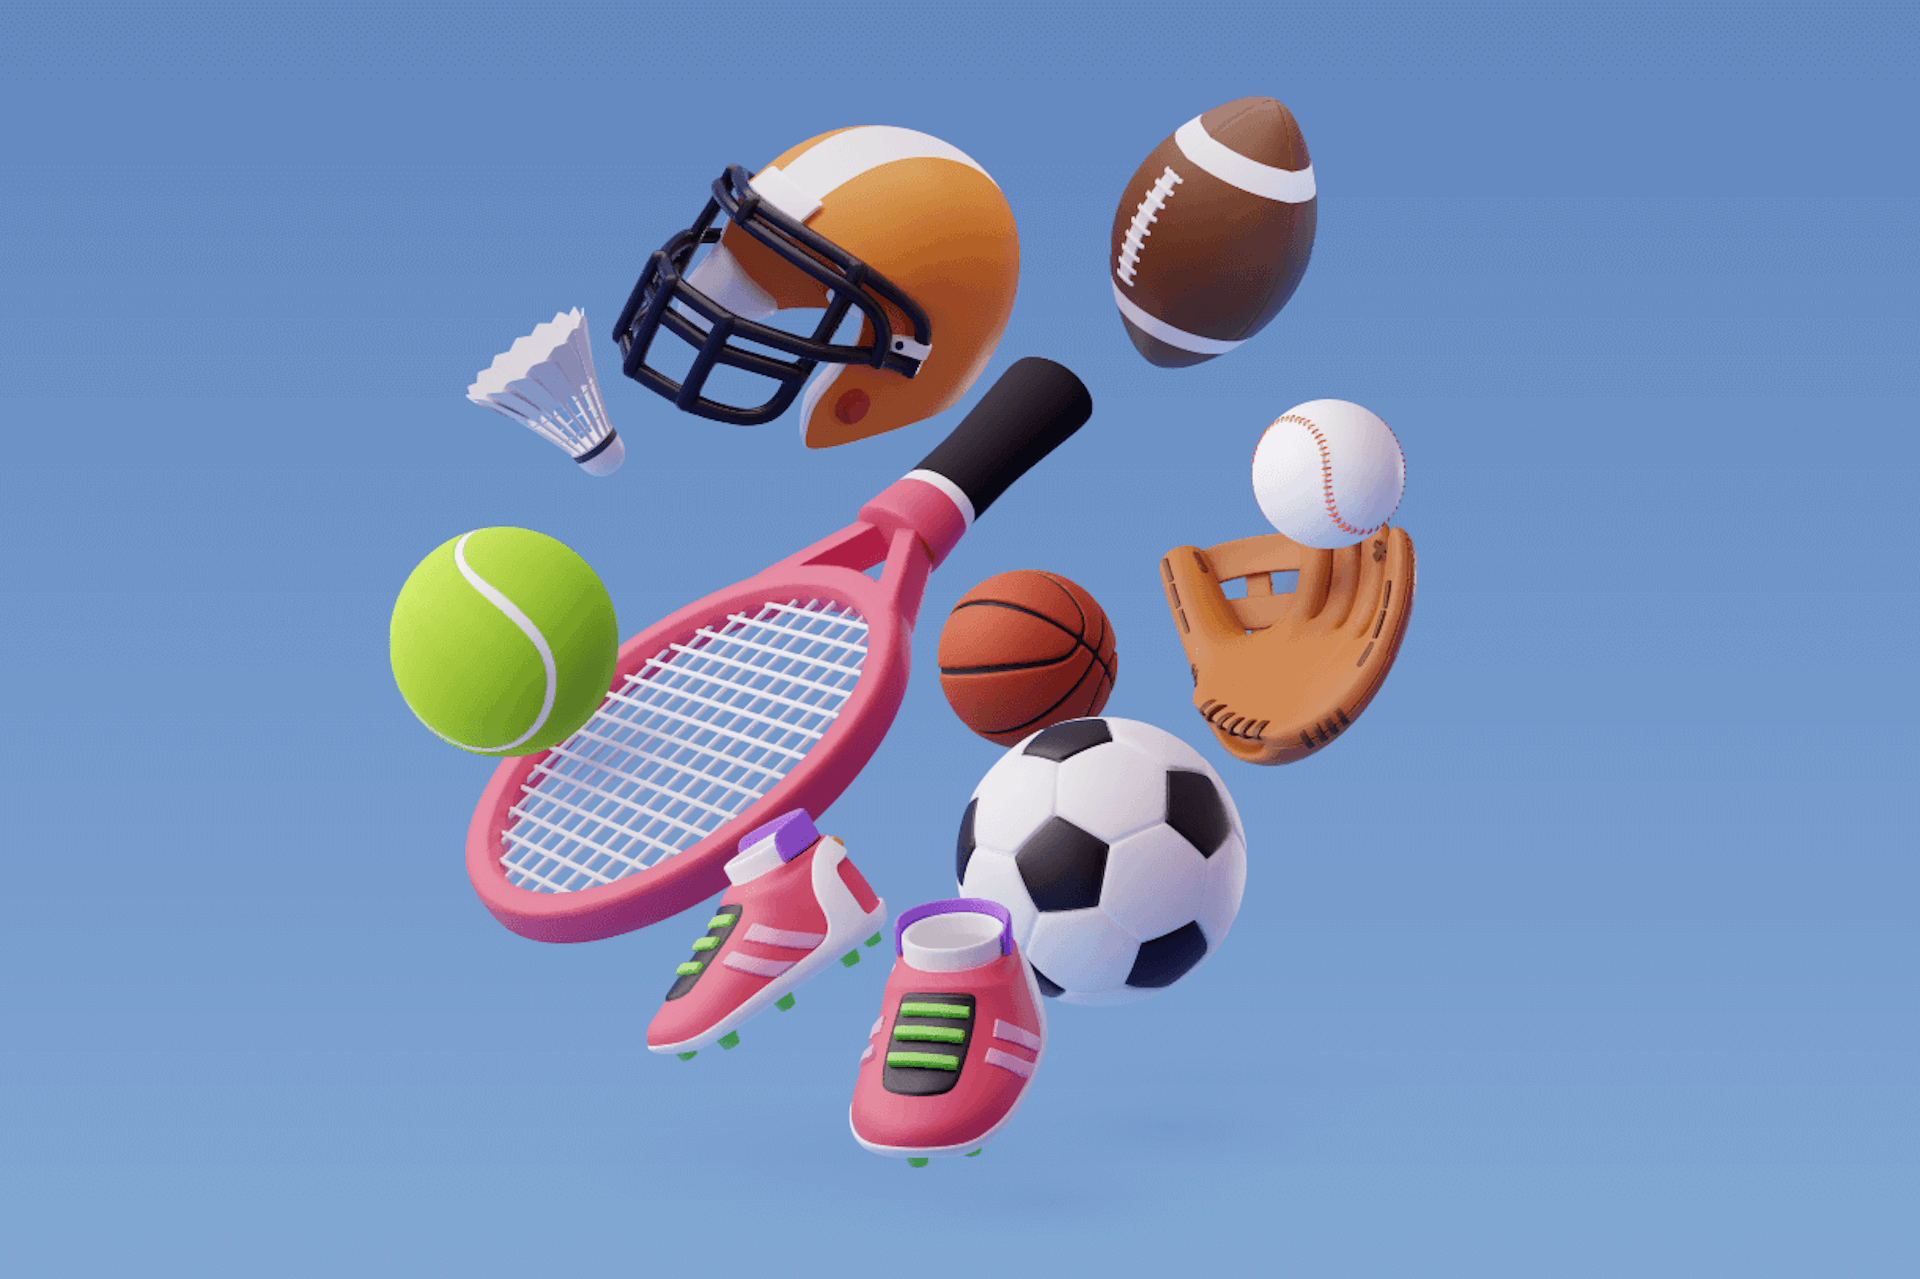 Image of various sports equipment floating in the air including a tennis racket, soccer ball, tennis ball, baseball, basketball, baseball glove, cleats, football, and football helmet. Top Sport und Fitness Influencer in Deutschland.